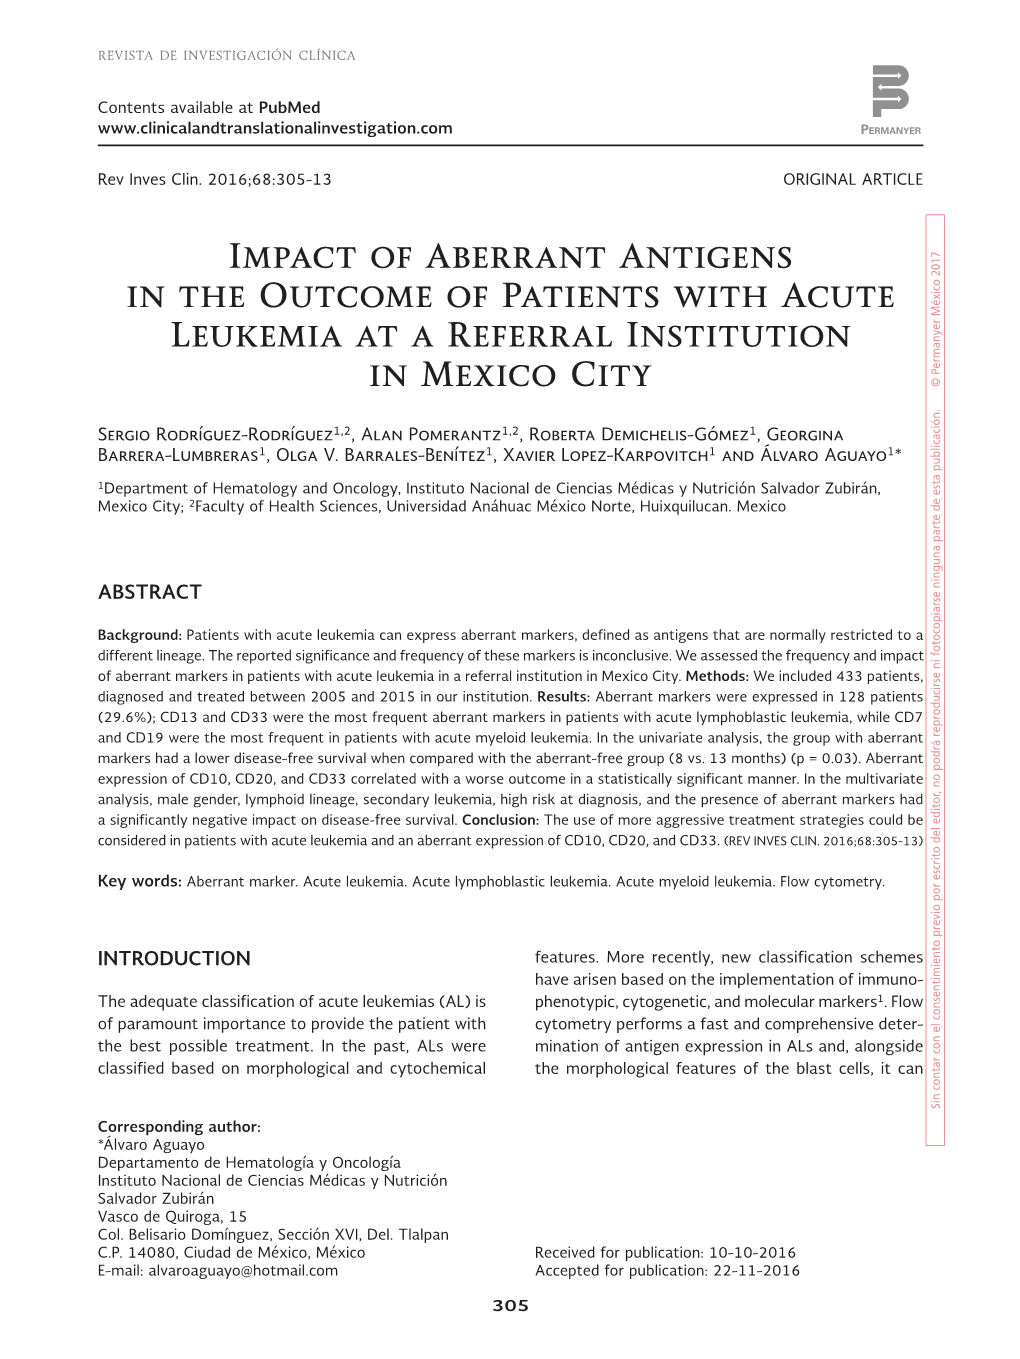 Impact of Aberrant Antigens in the Outcome of Patients with Acute Leukemia at a Referral Institution